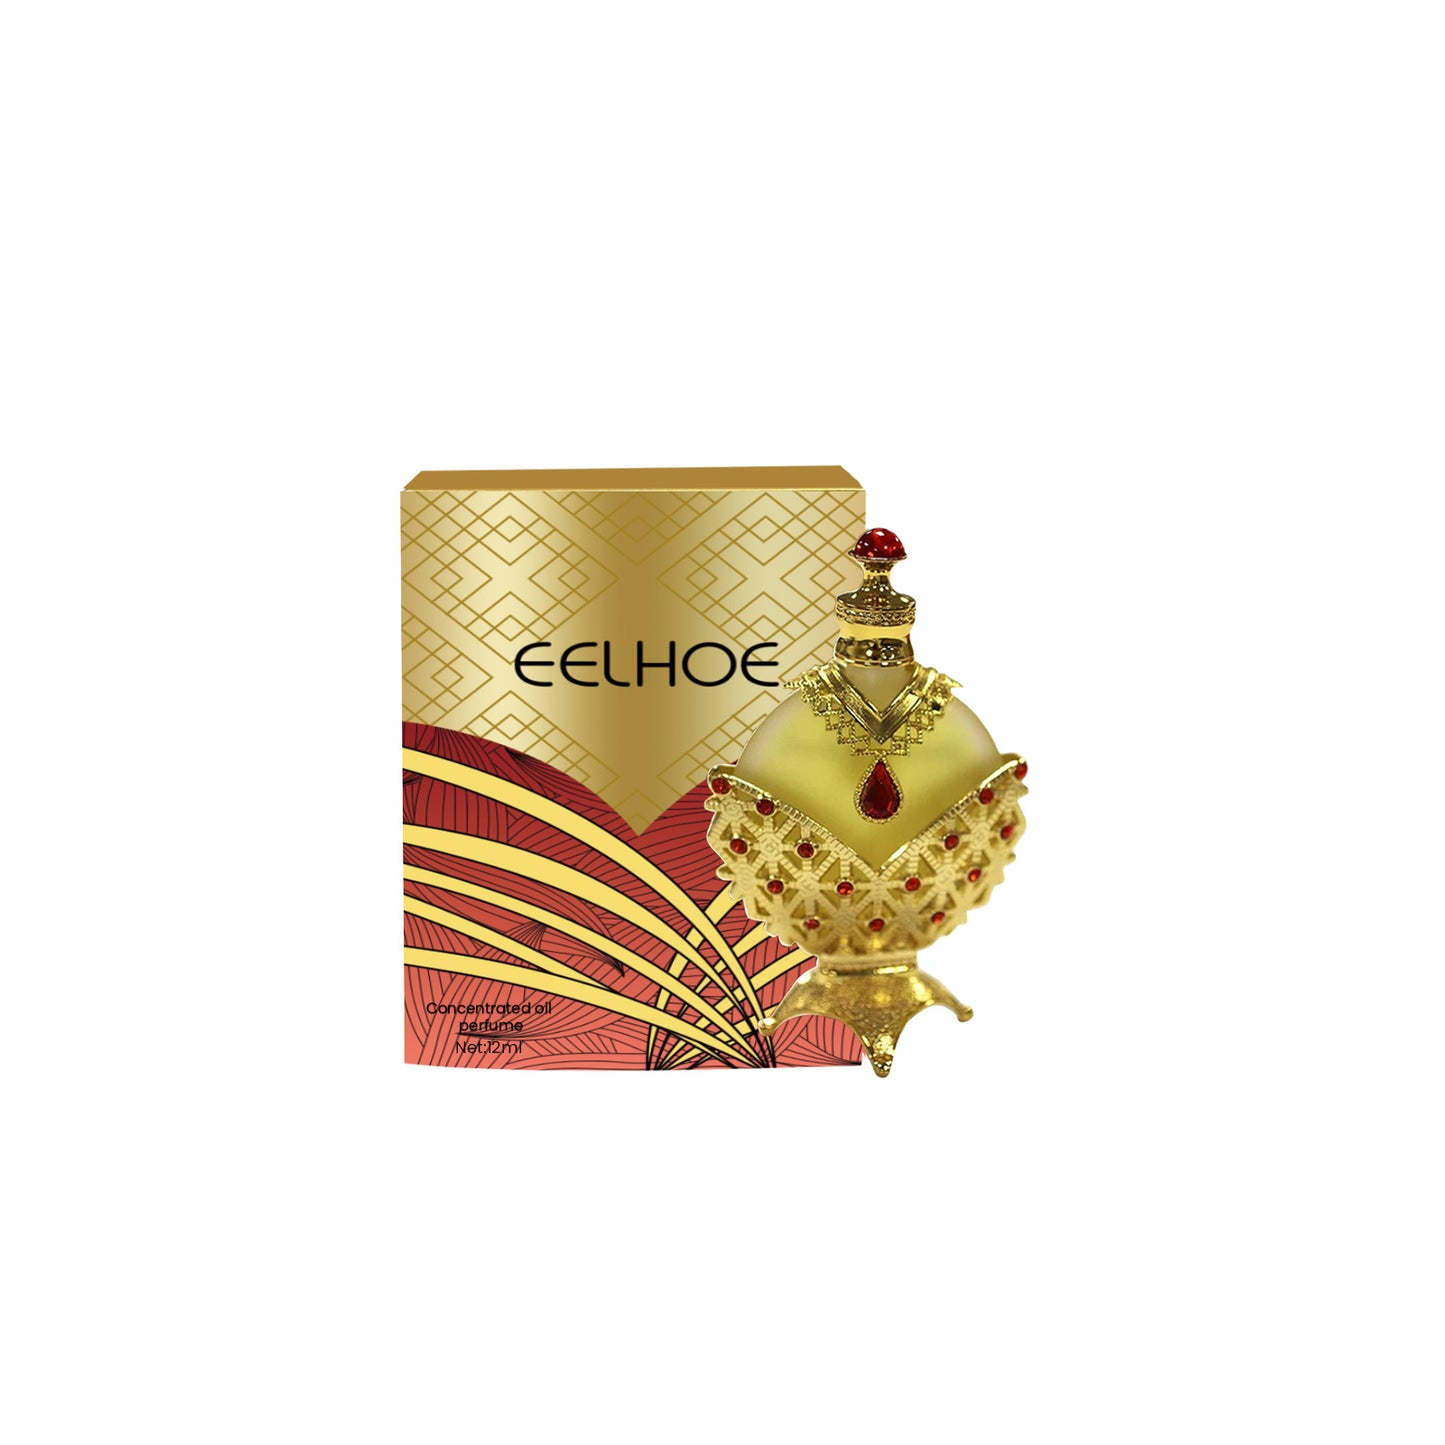 EELHOE concentrated perfume oil natural light fragrance fresh and mild non-pungent fragrance lasting couple dating perfume